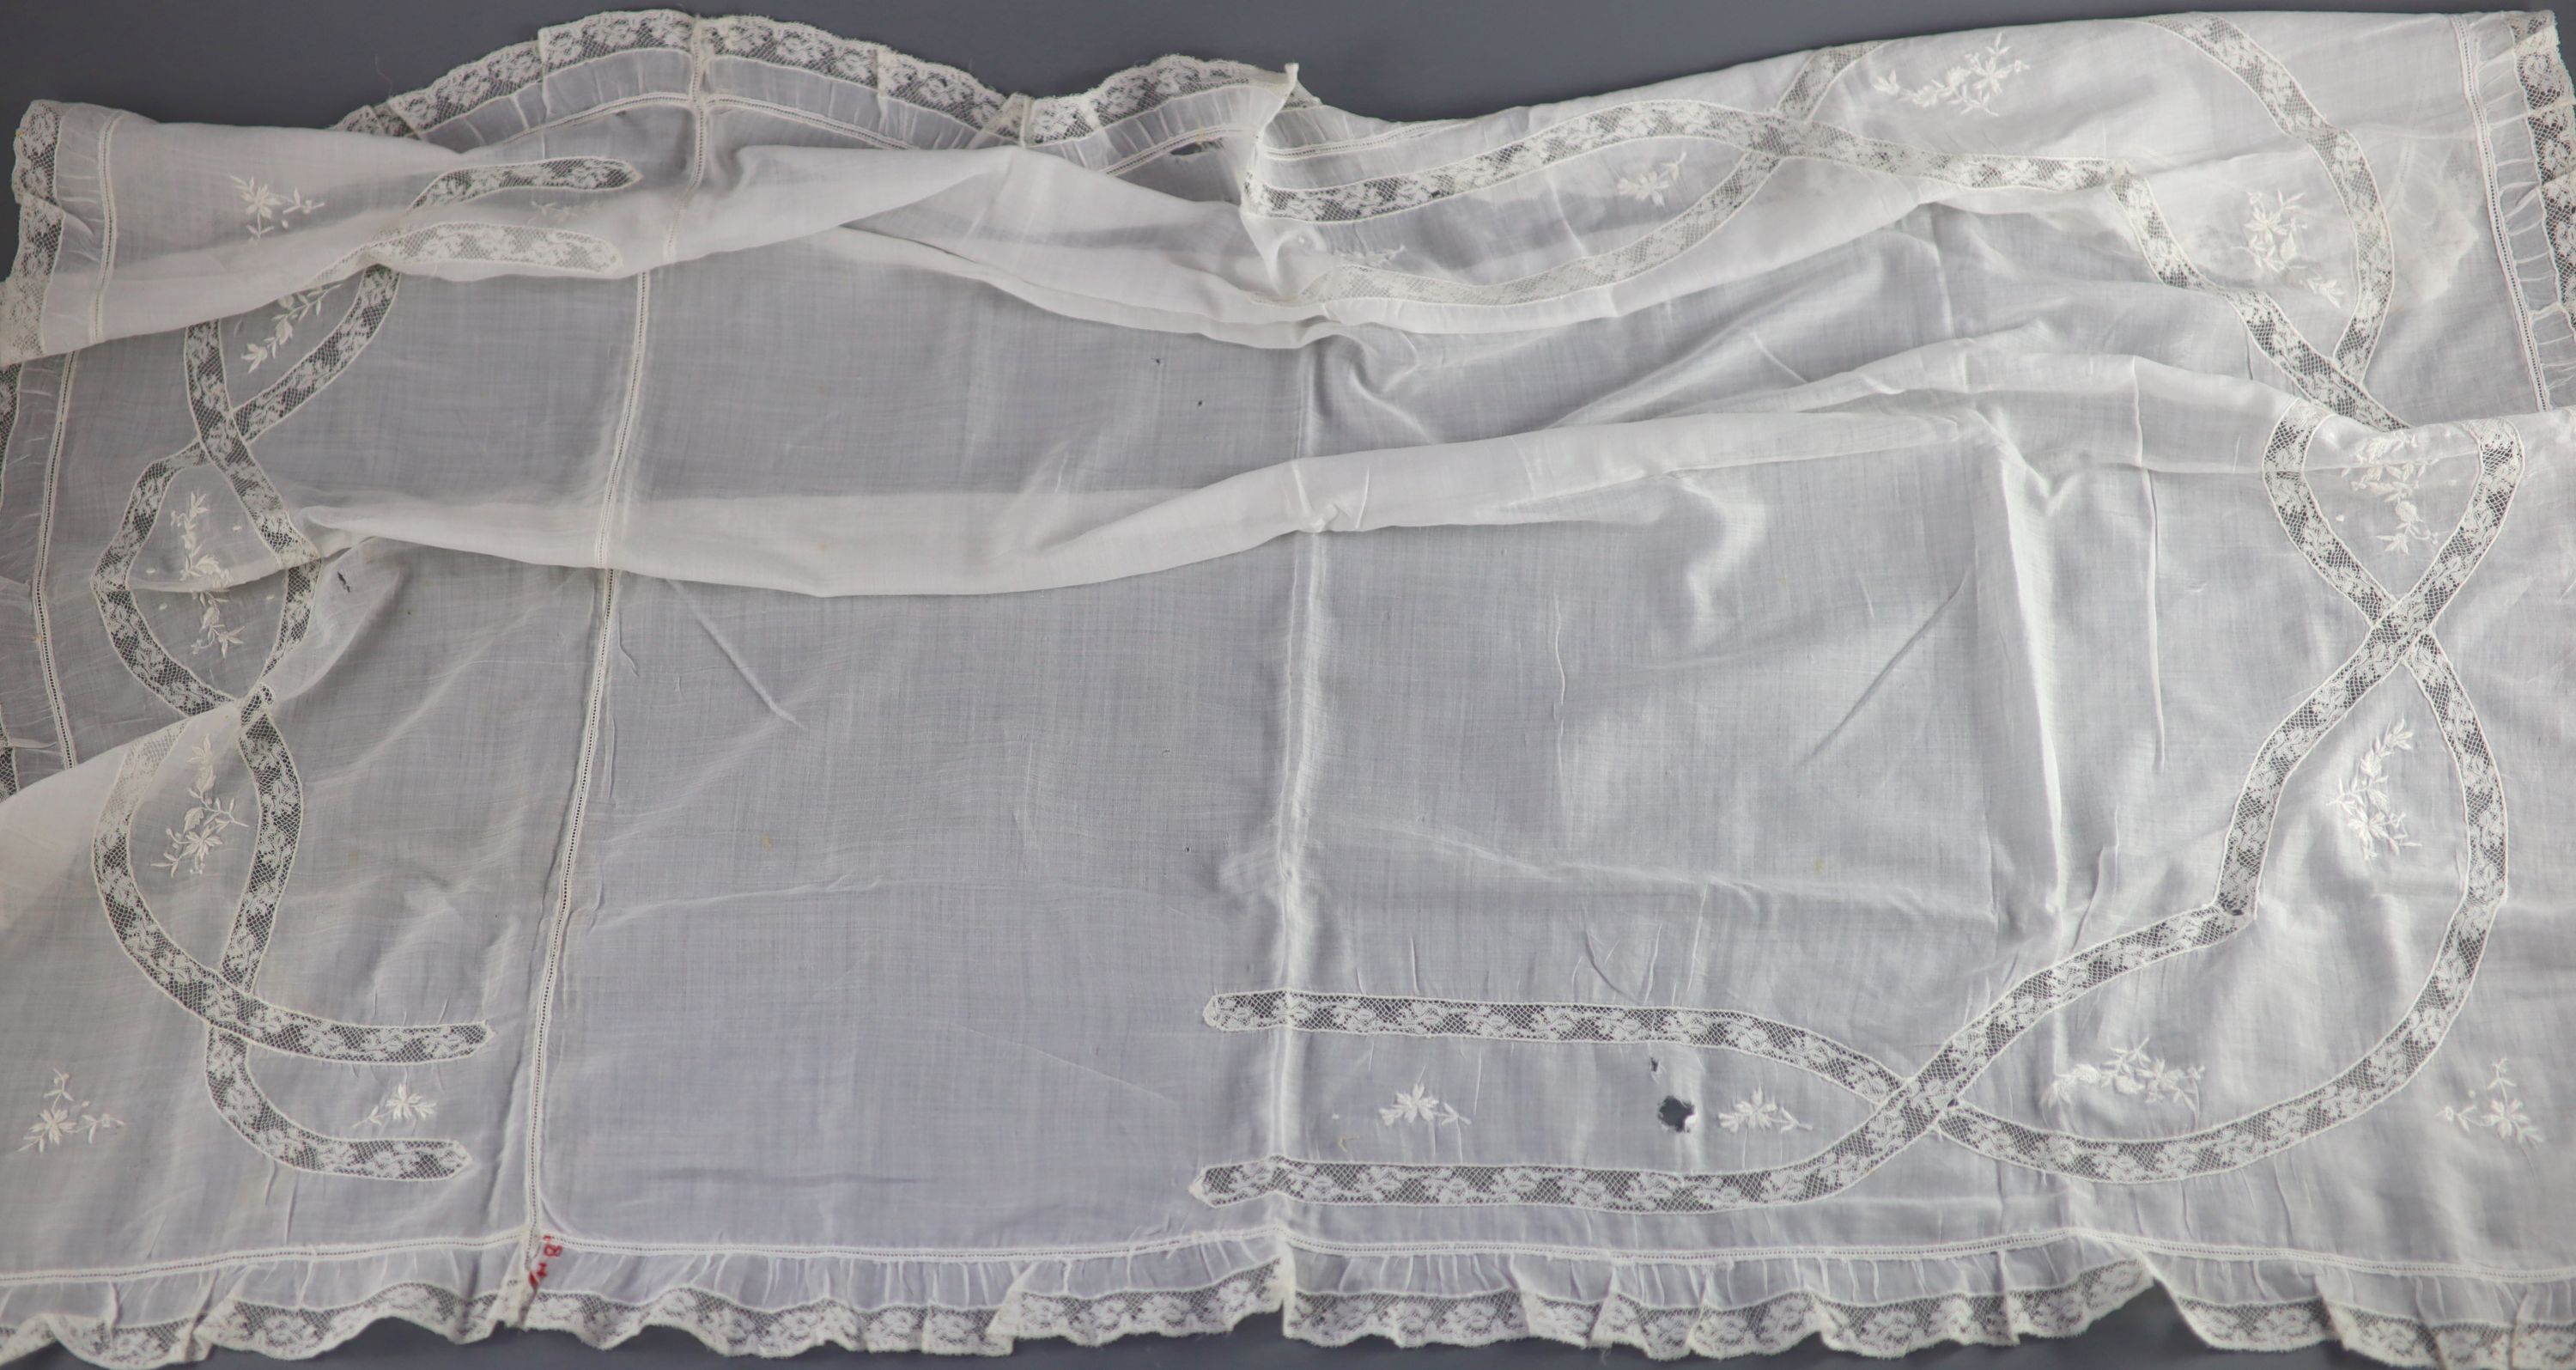 A fine white worked embroidered lace inset coverlet, a filet lace square of a figure wearing a crown (plus museum note),